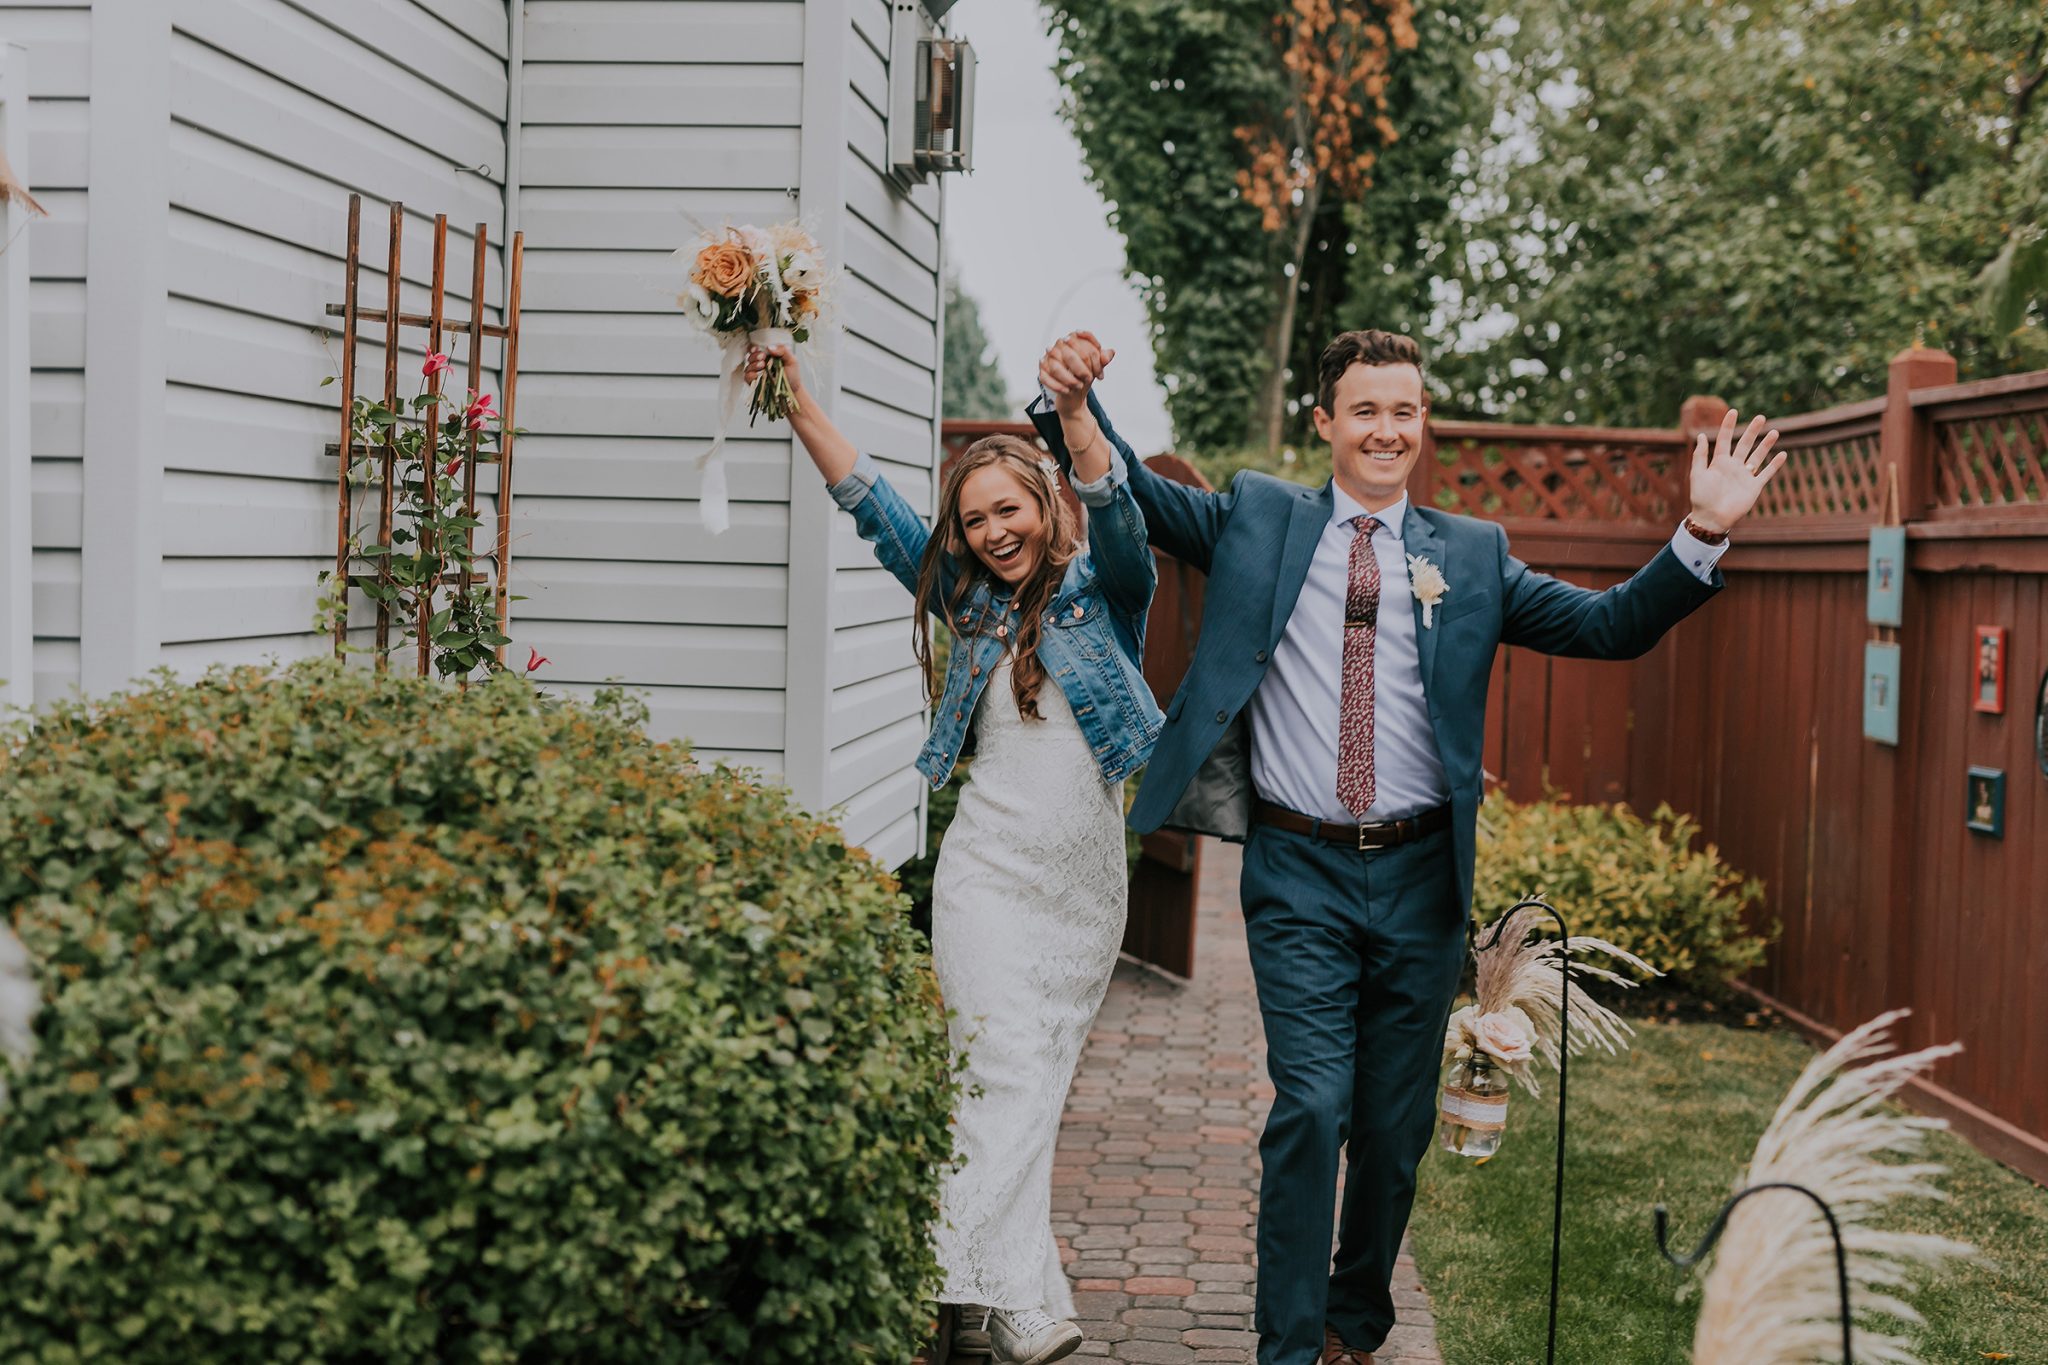 A Little Bit of Rain and Covid Restrictions weren't about to Slow This Couple Down! Featured on Brontë Bride, backyard wedding, wedding reception